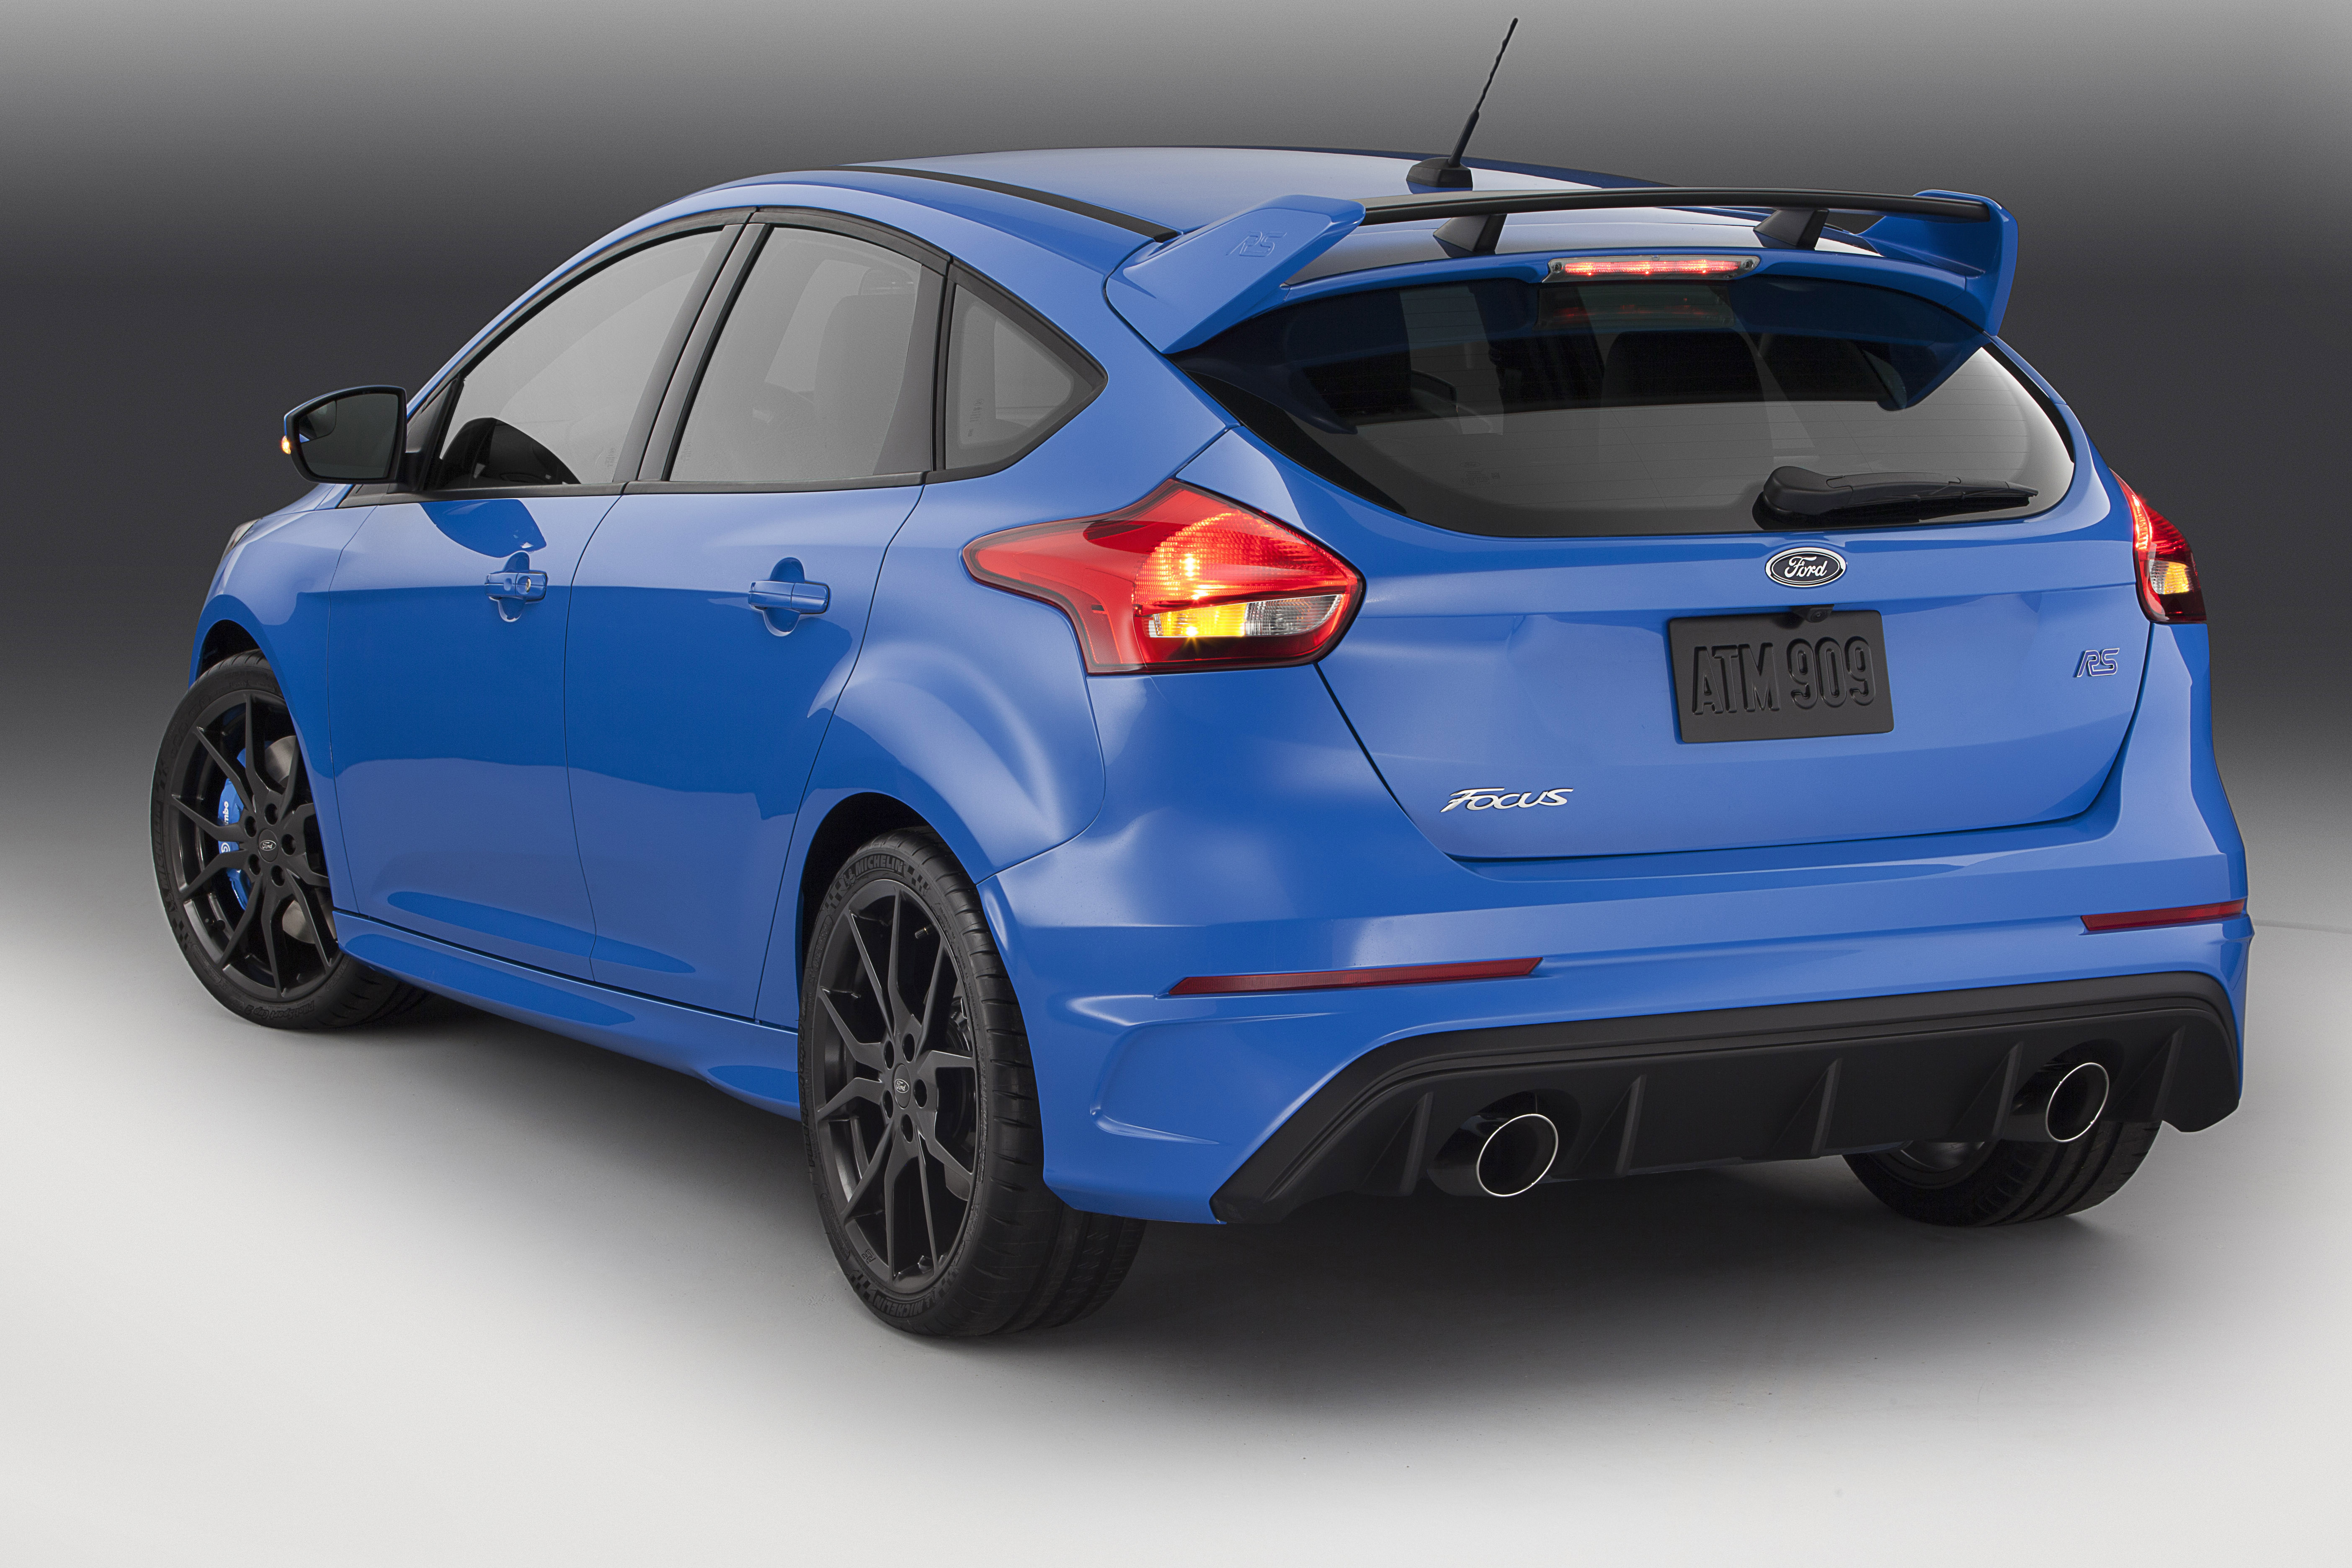 All-New Ford Focus RS Makes U.S. Debut in New York | Ford Media Center